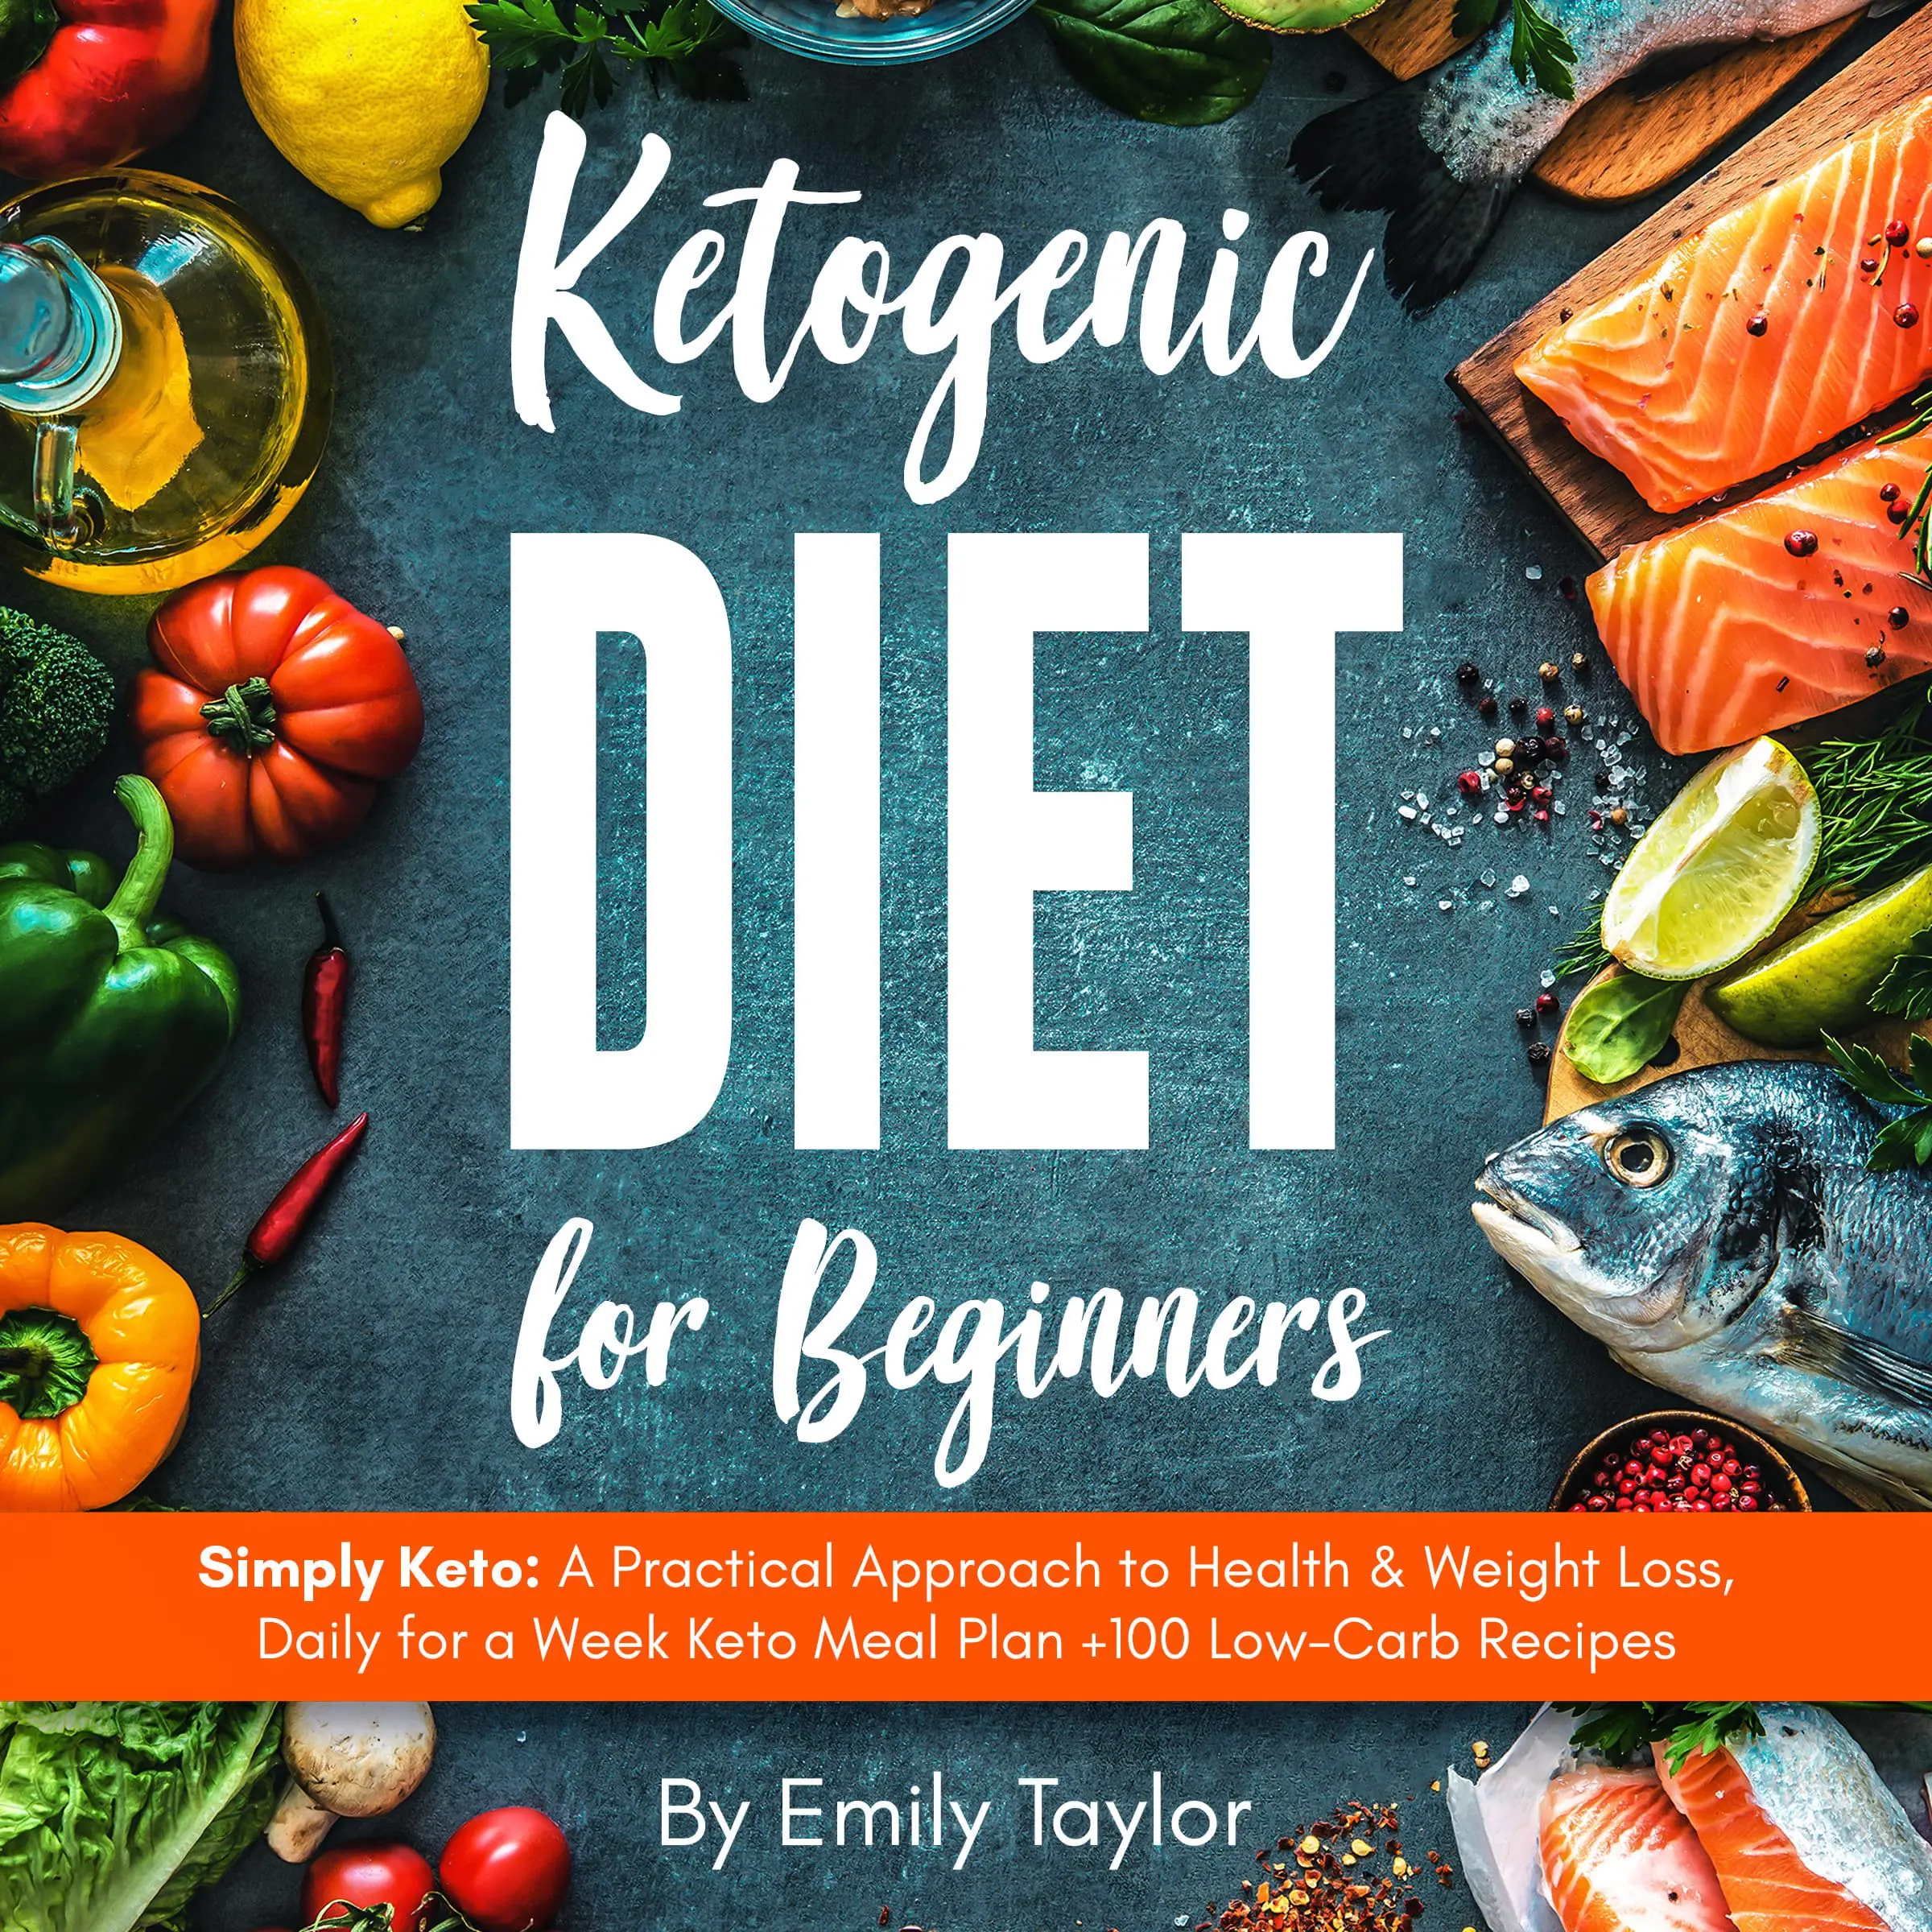 Ketogenic Diet for Beginners Audiobook by Emily Taylor